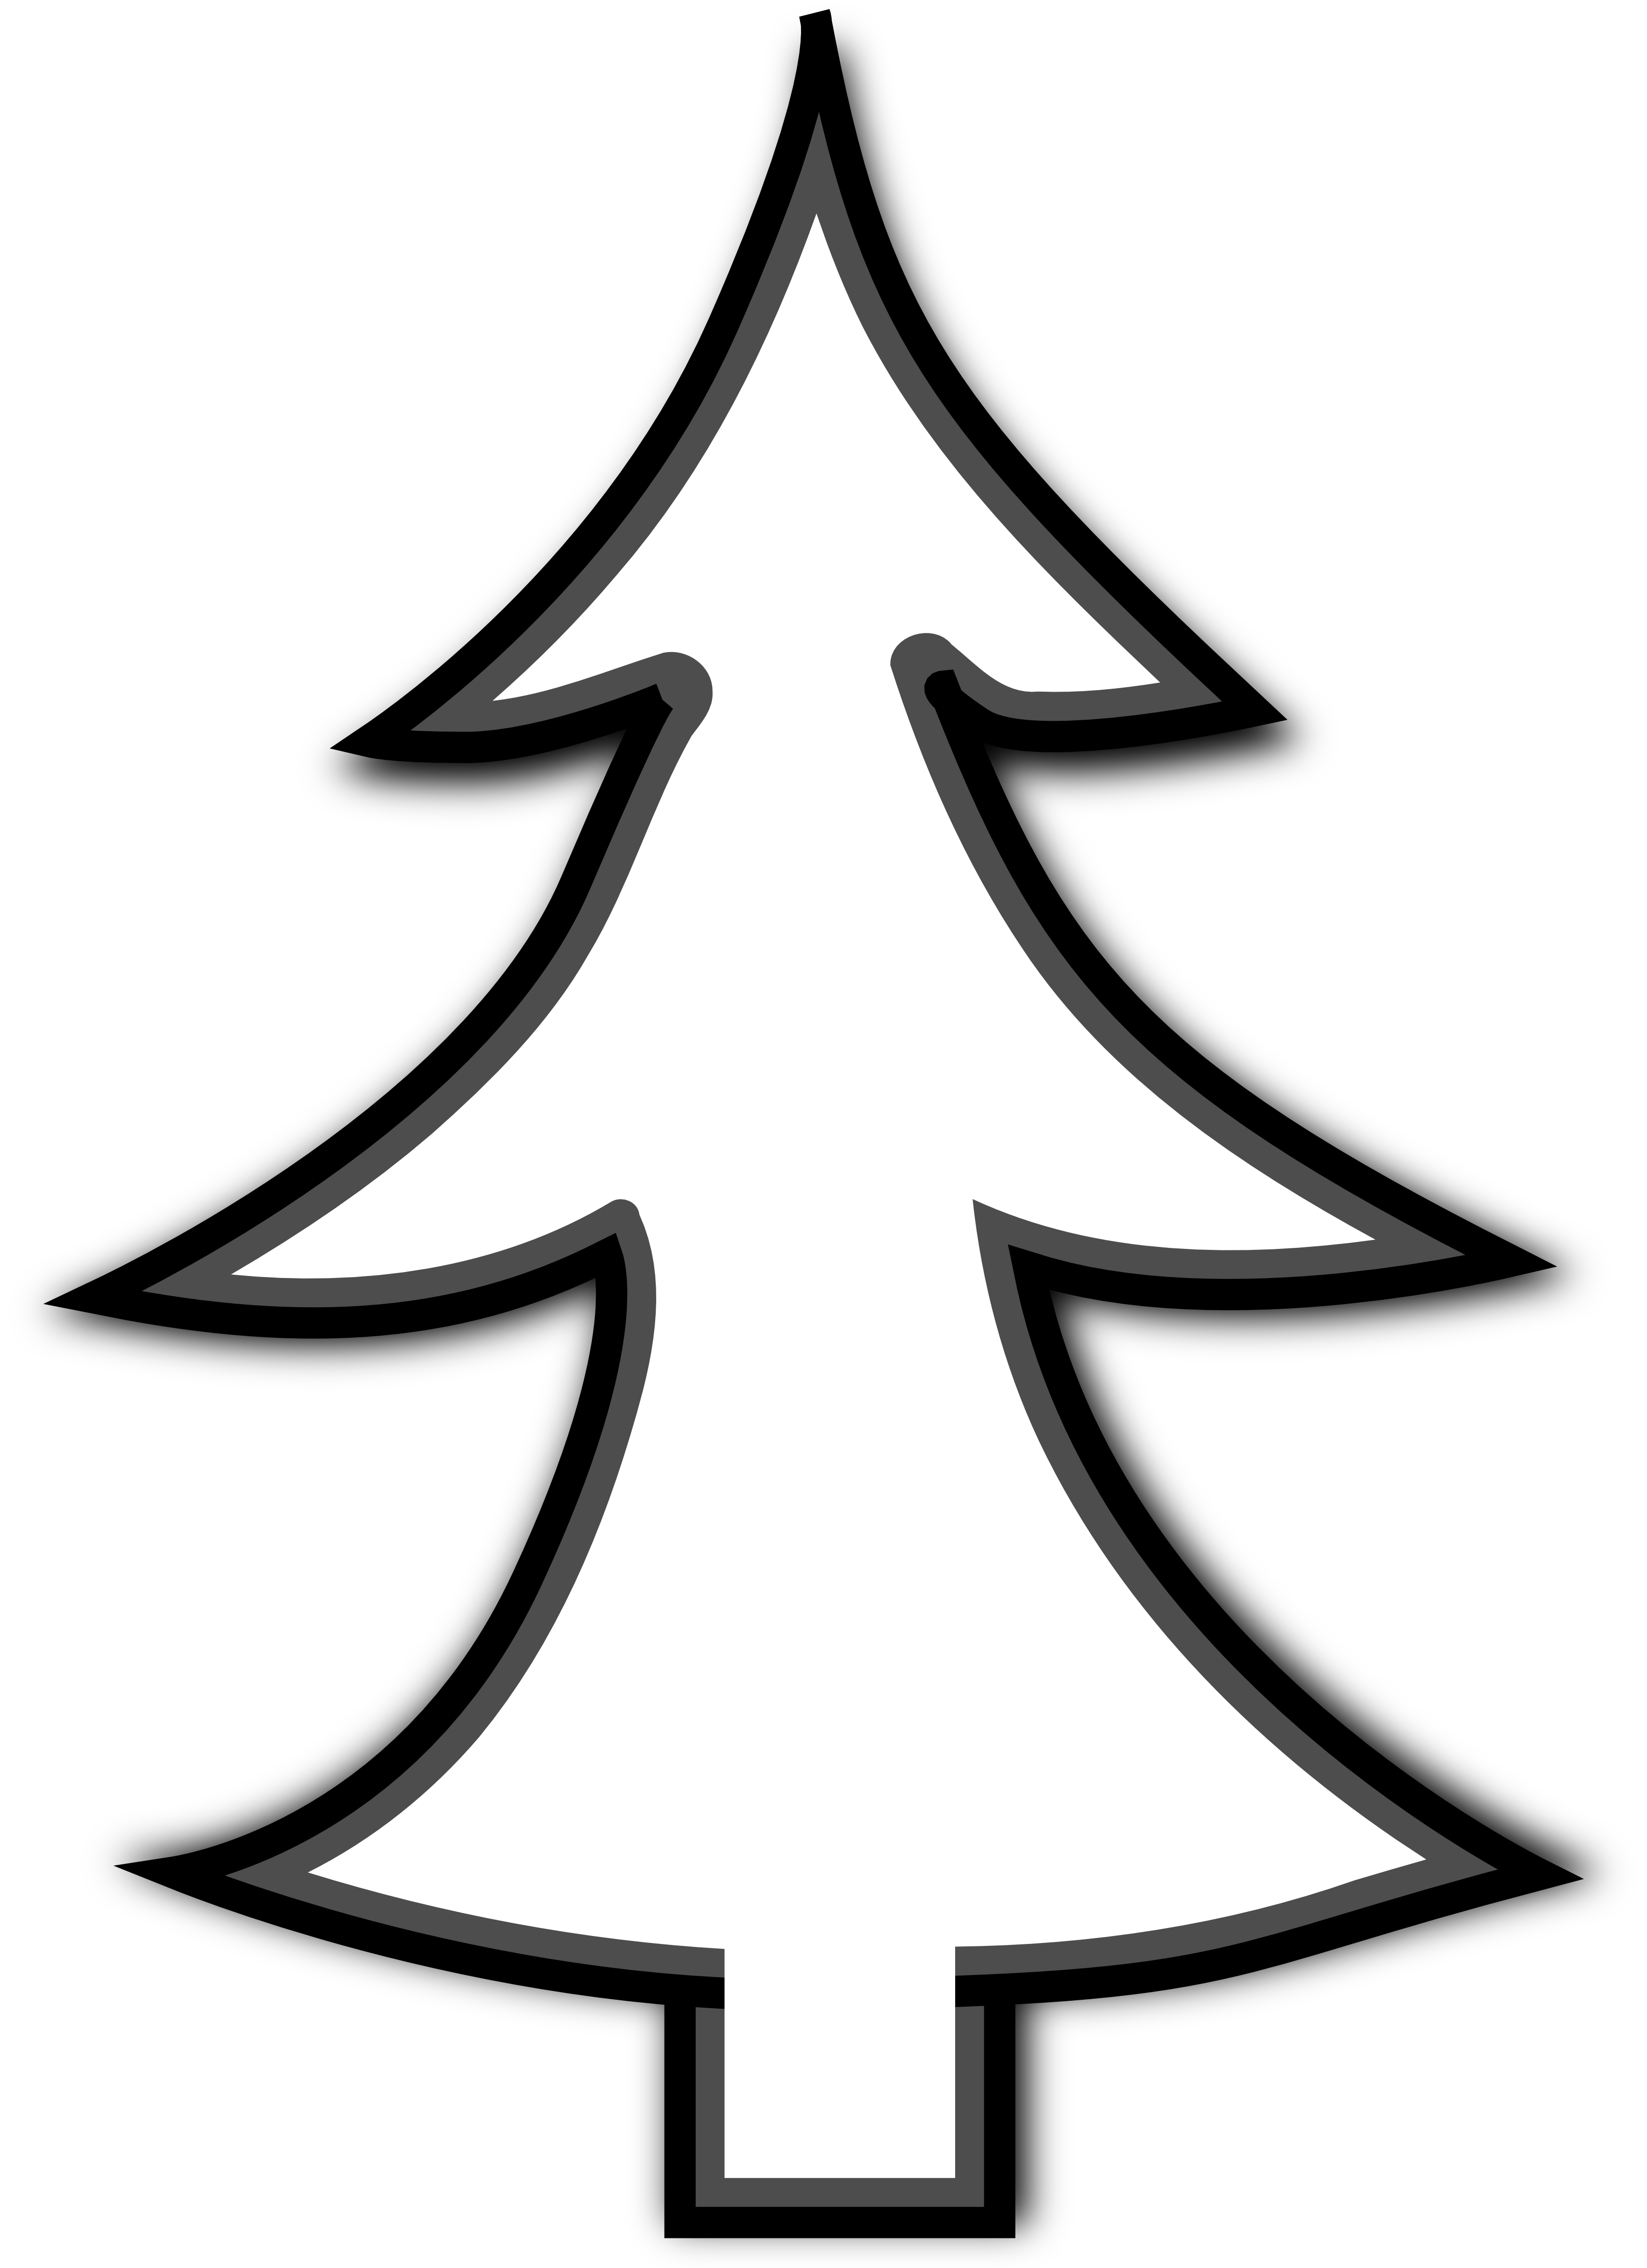 Free Black And White Christmas Image, Download Free Clip Art, Free Clip Art on Clipart Library